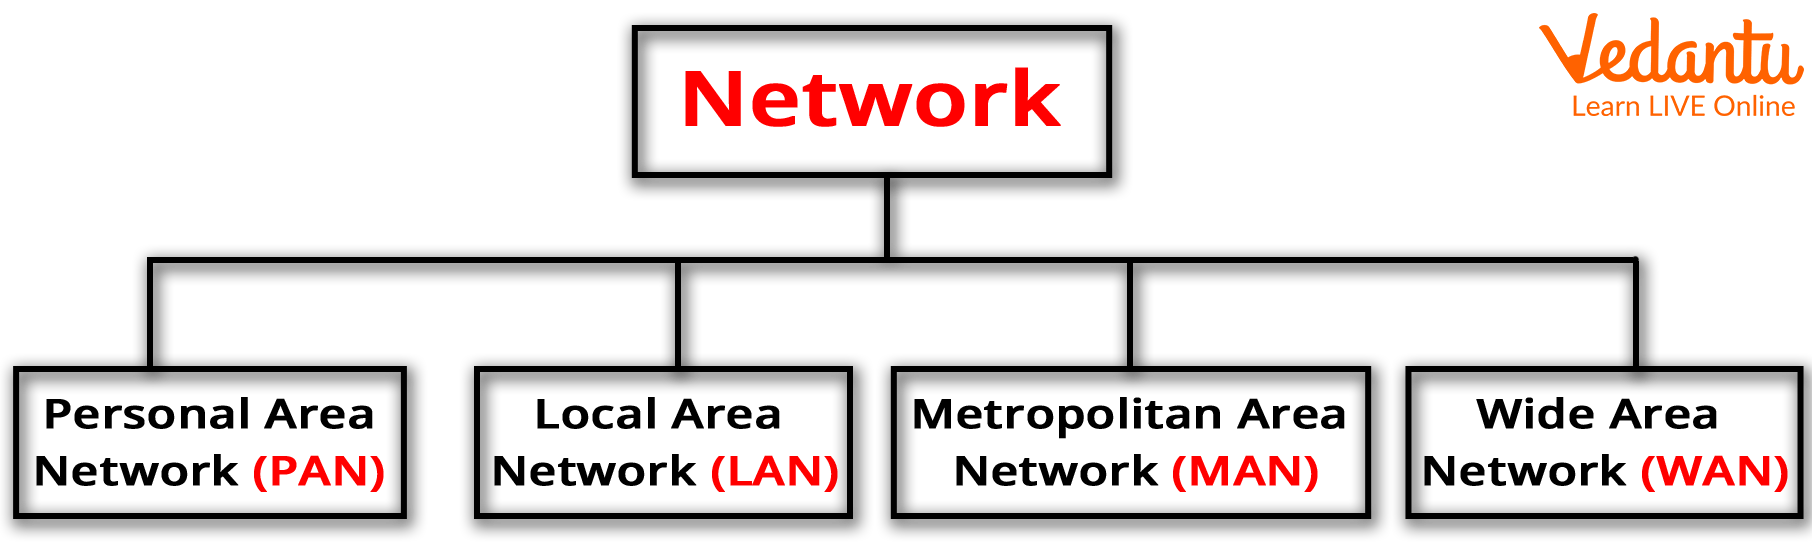 Different Types of Networks